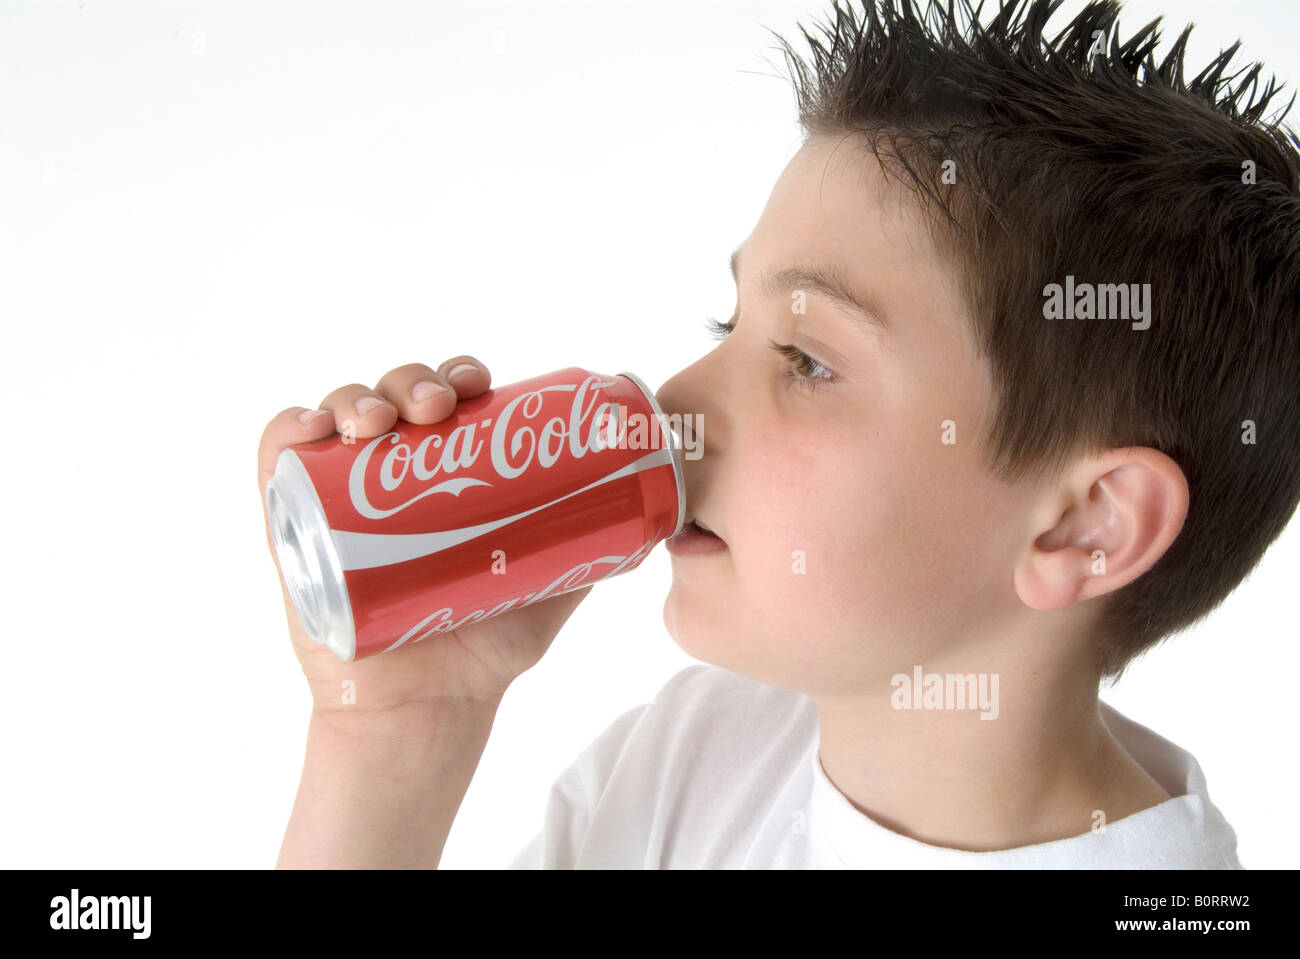 boy child young drinking coke a cola can tin pop red coke can drink drinking drinker marketing american brand iconic logo design Stock Photo